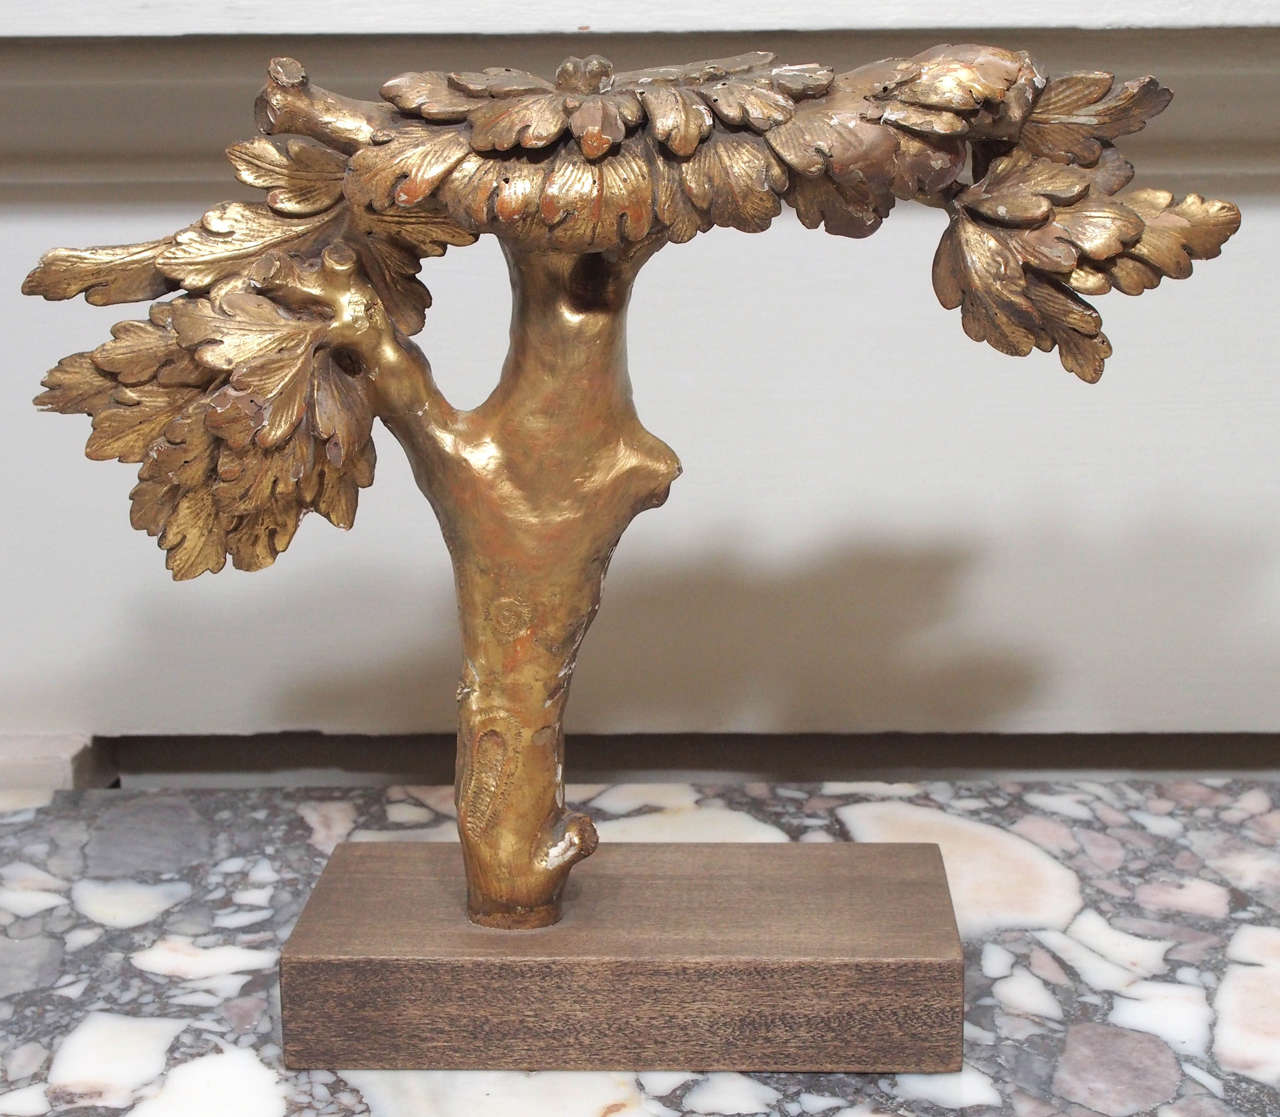 An 18c. finely carved and gilded tree, mounted on a contemporary base.